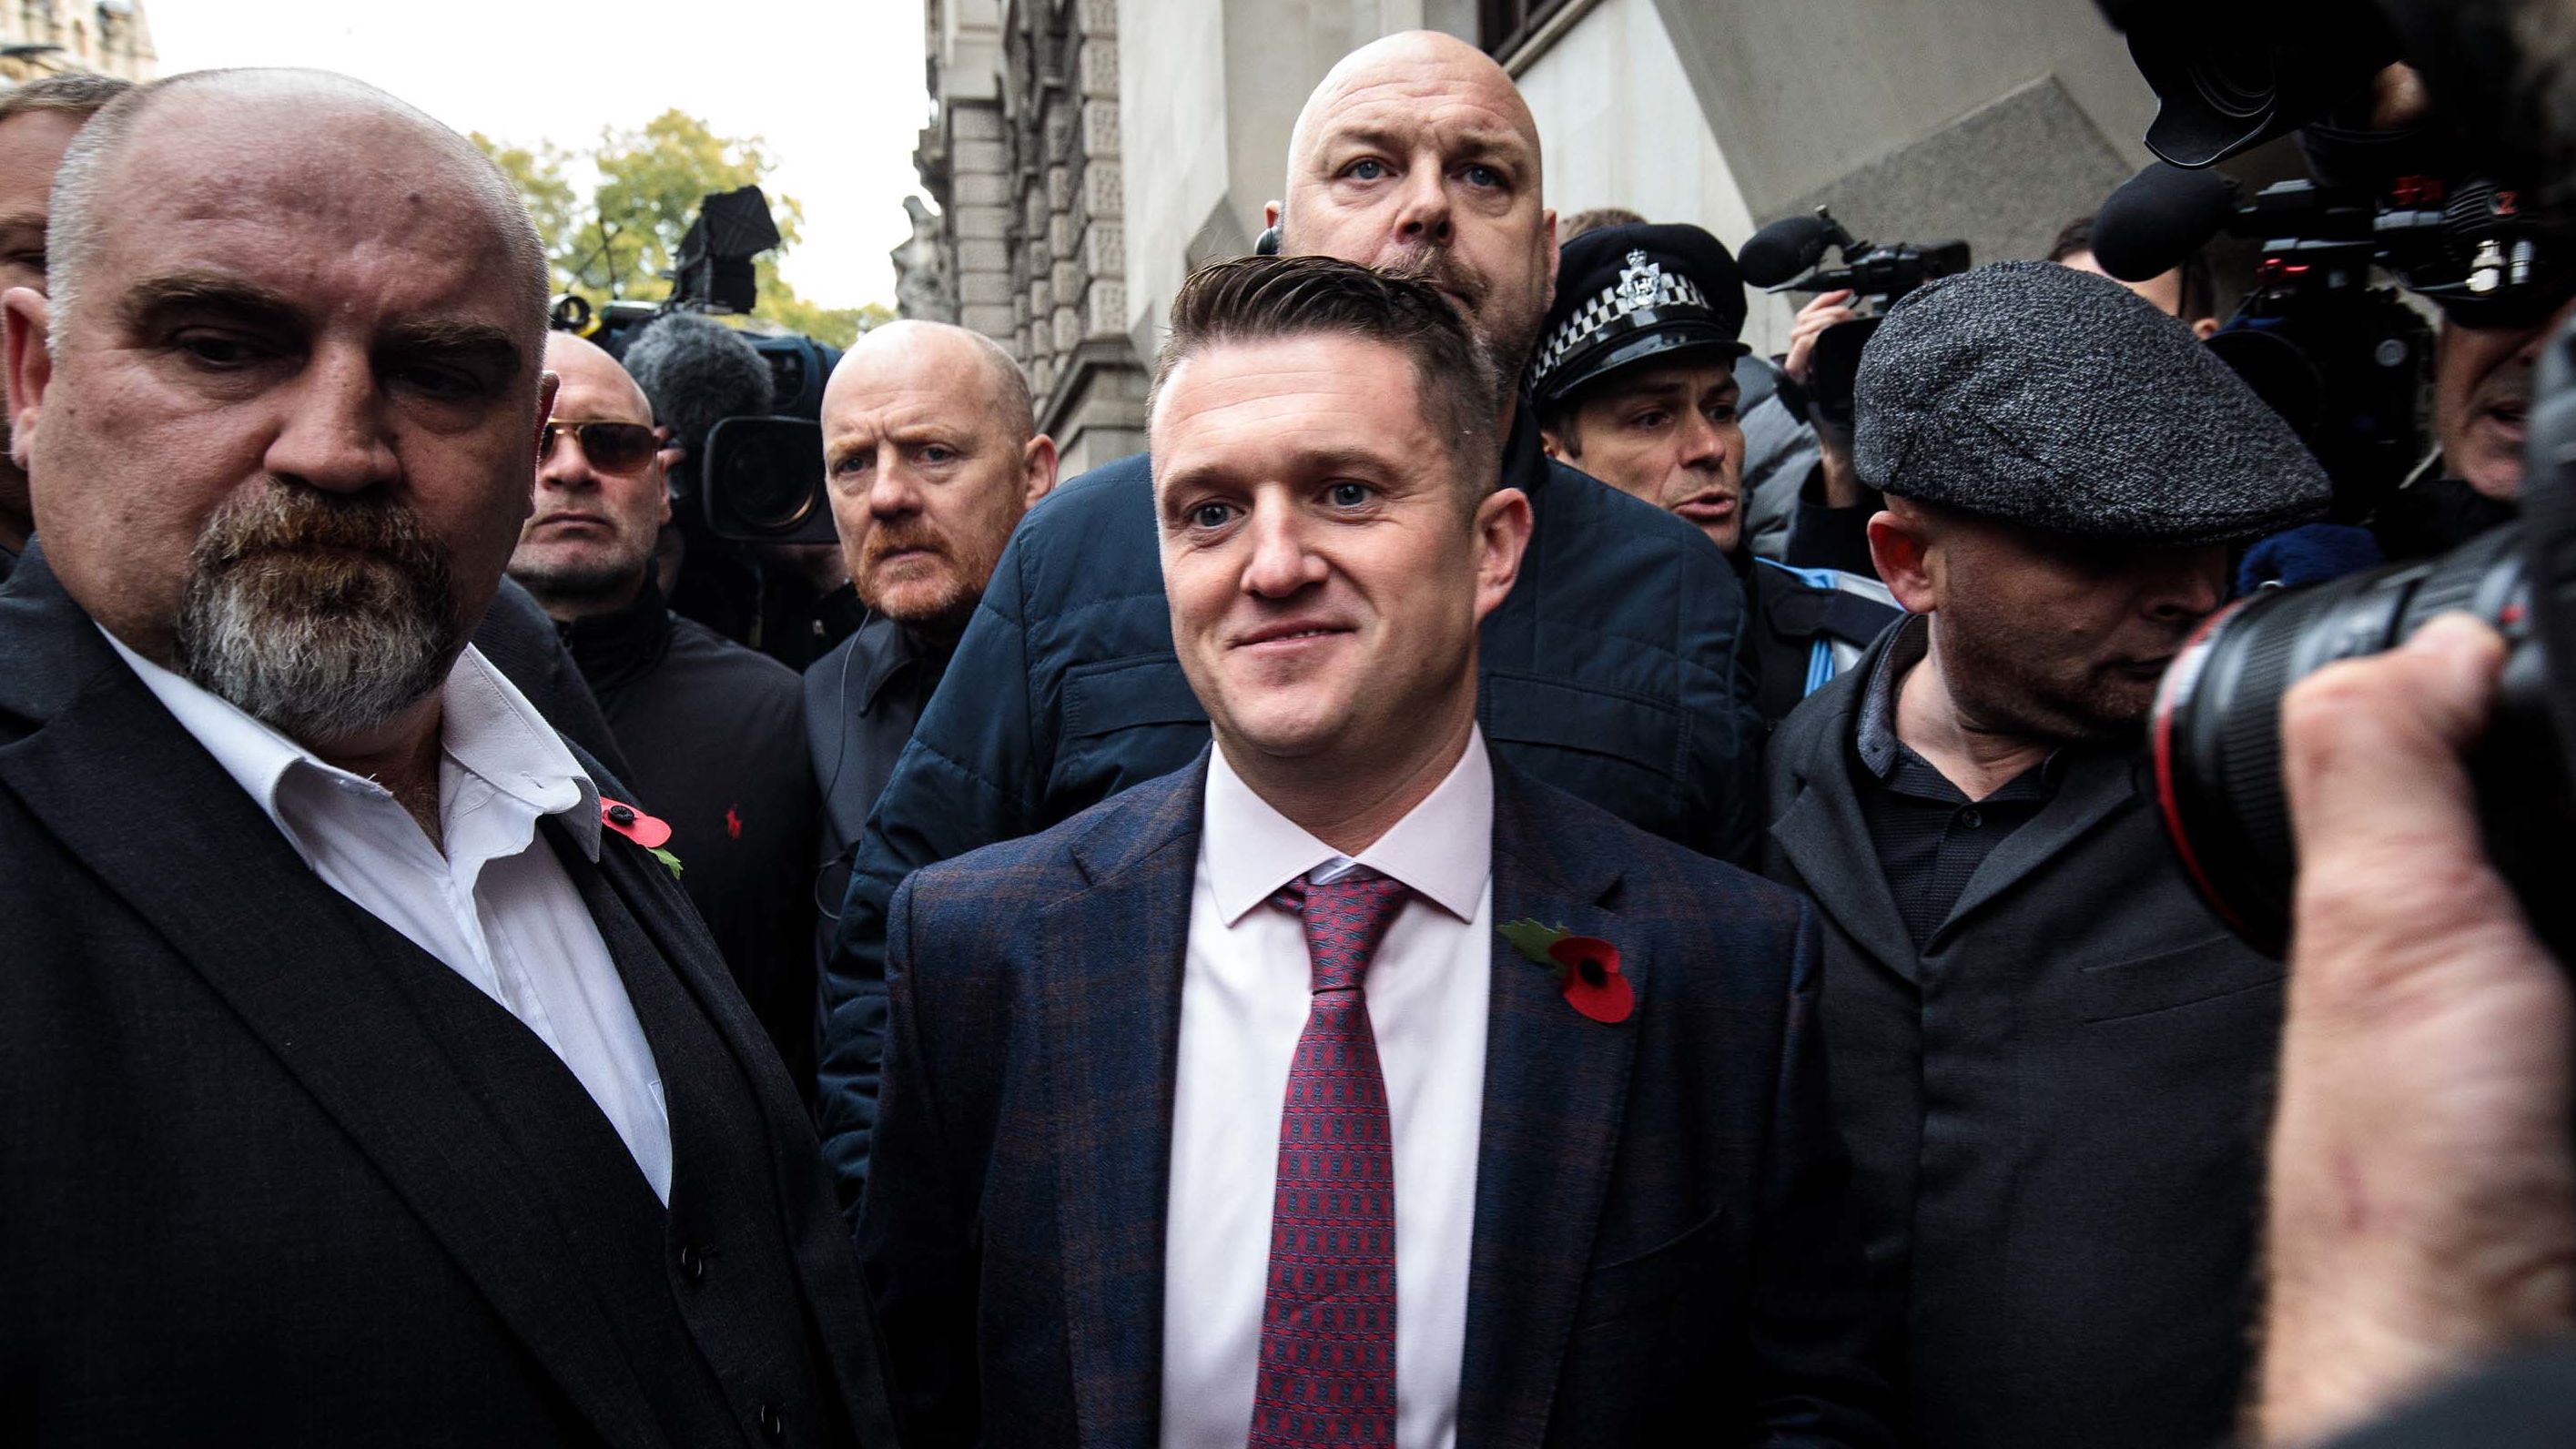 Far-right activist Tommy Robinson, whose real name is Stephen Yaxley-Lennon, pictured outside the Old Bailey court in October.